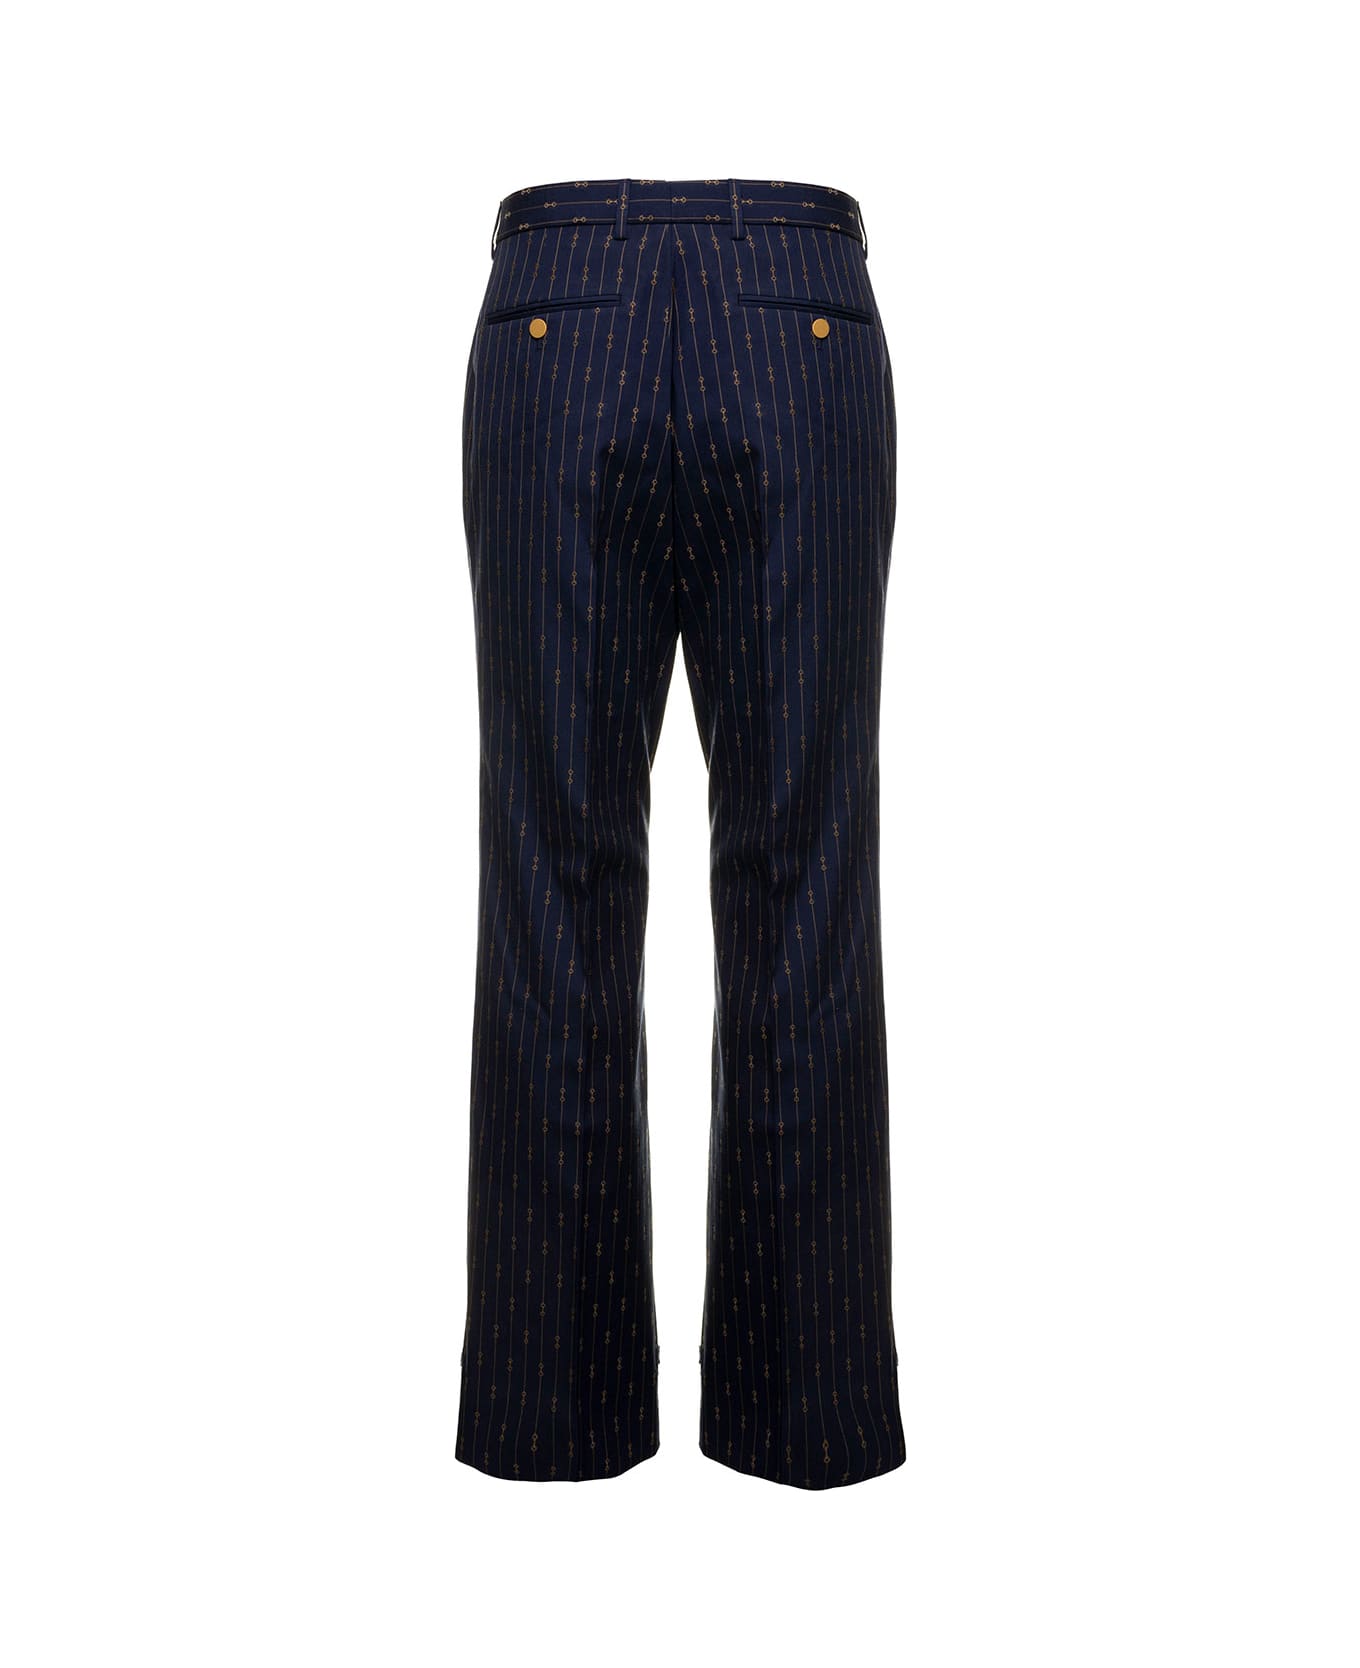 Gucci Man's Blue Wool Tailored Pants With Allover Horsebit Motif - blue